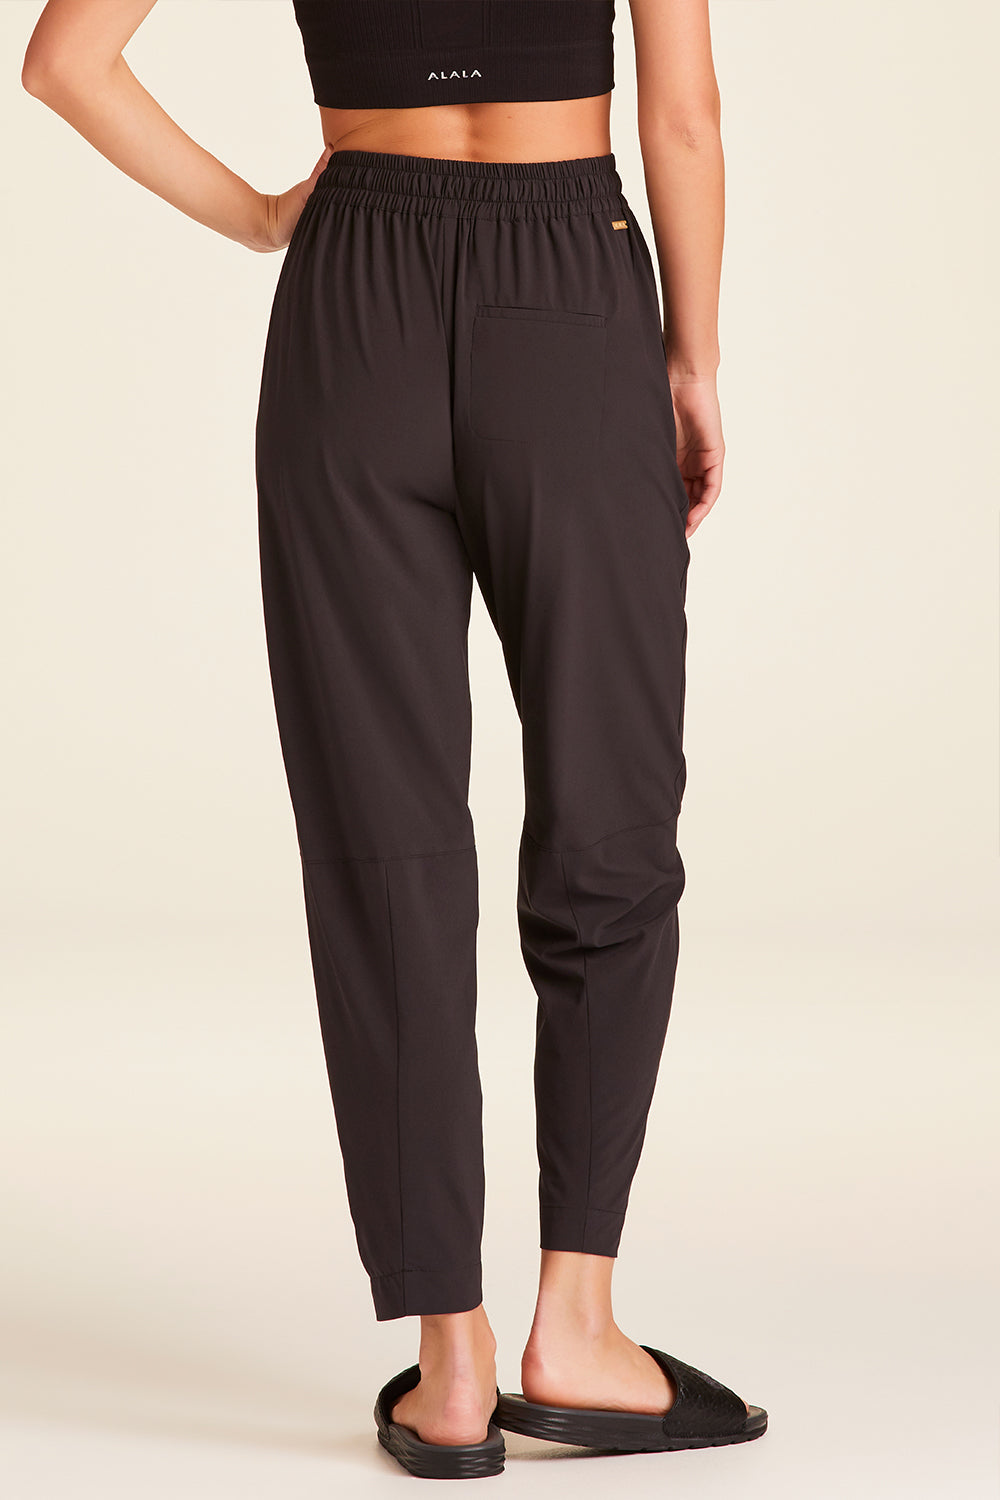 Commuter Pant - Black Elevated Pants, High Waisted Pants Women